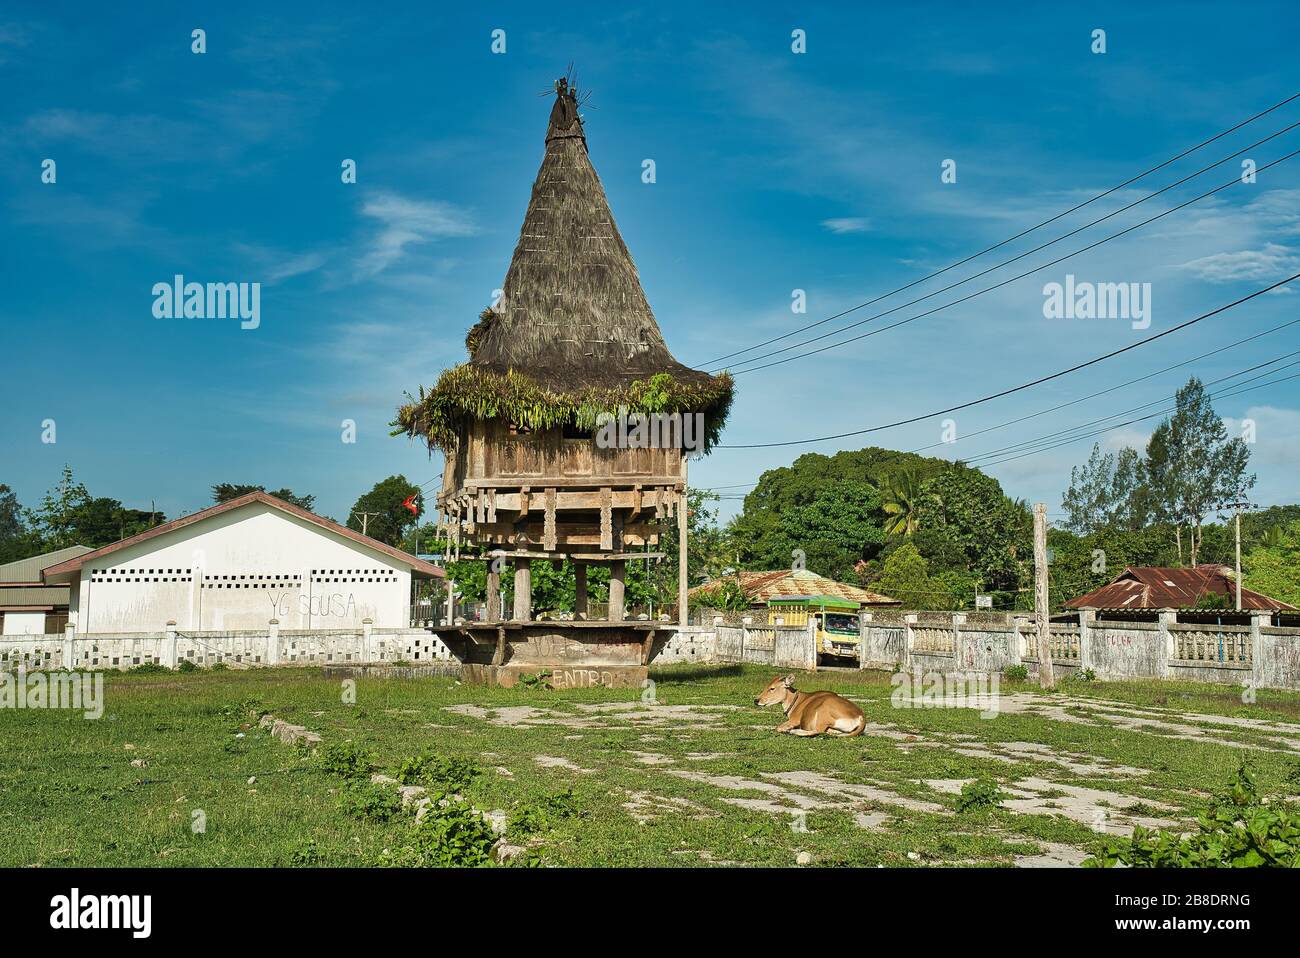 Traditional wooden construction of Fataluku people in Lospalos, Lauten. Timor Leste (East Timor). Cow lying down. Stock Photo